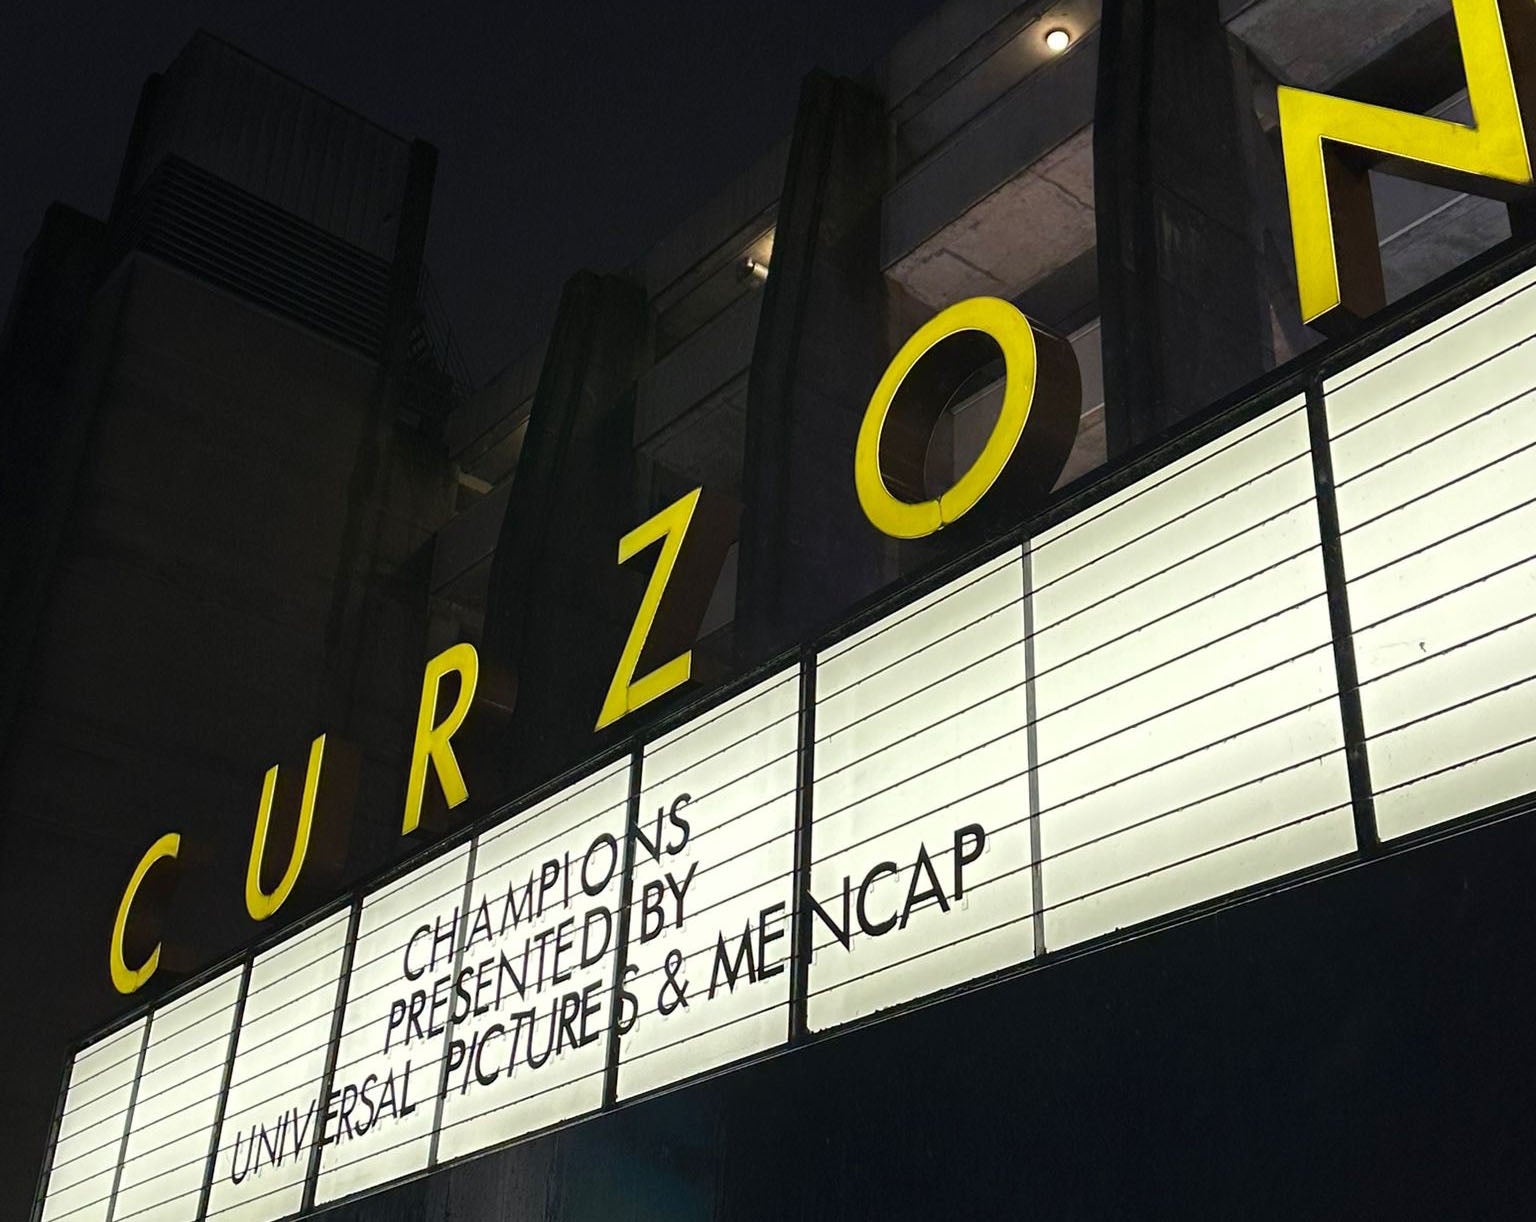 A cinema banner lit up at night, which reads CHAMPIONS PRESENTED BY UNIVERSAL PICTURES & MENCAP